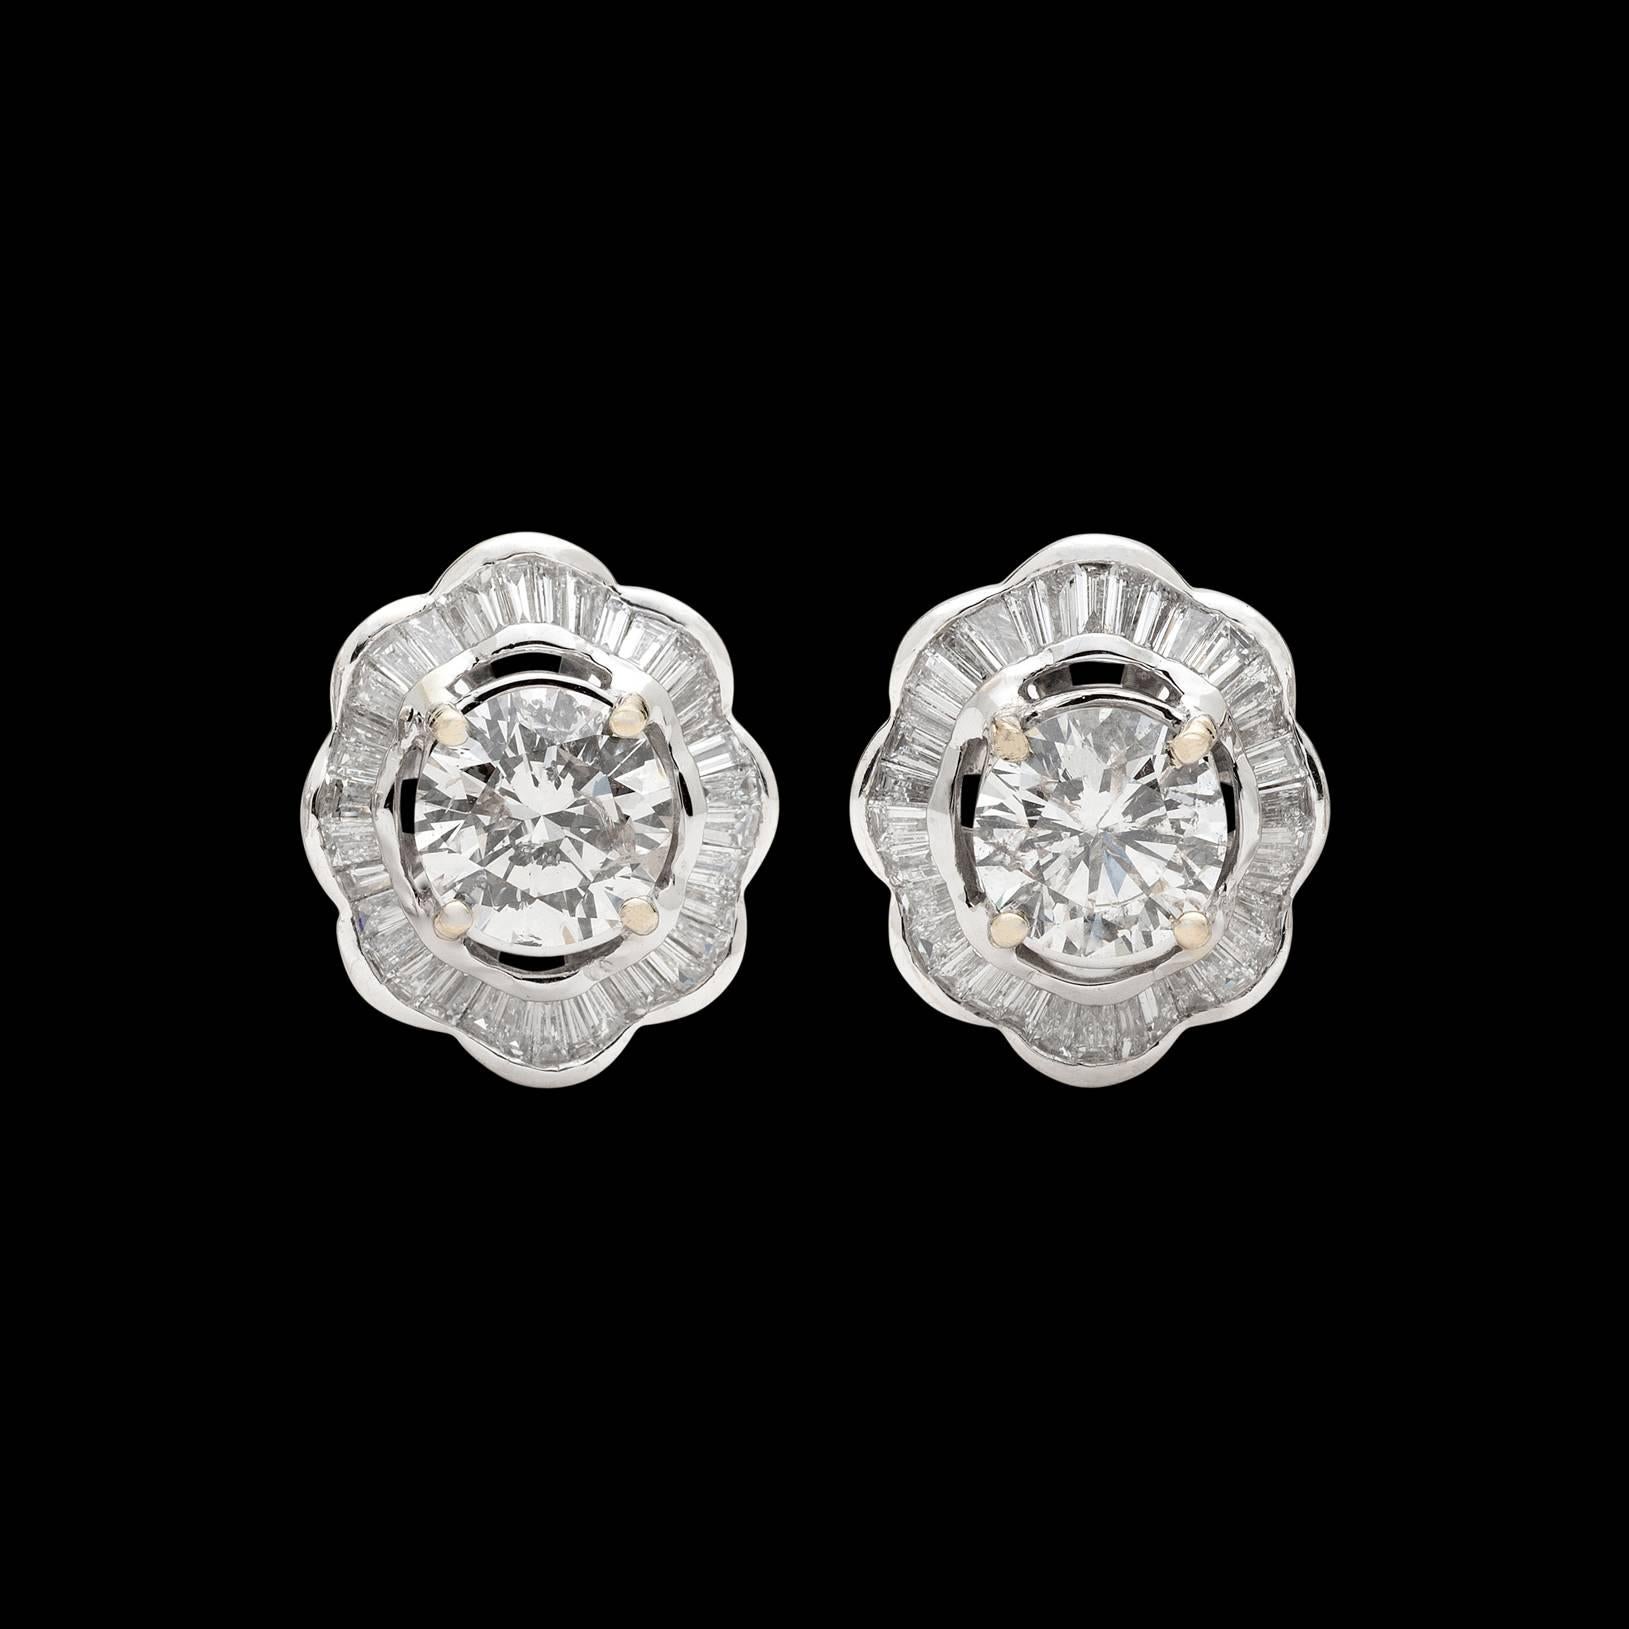 Better than simple studs, these classic 14k white gold earrings feature 2 Round Brilliant-Cut weighing together 3.35 carats, framed by waved swirls of baguette-cut diamonds, for a total diamond weight of 4.75 carats. The earrings weigh 8.0 grams.